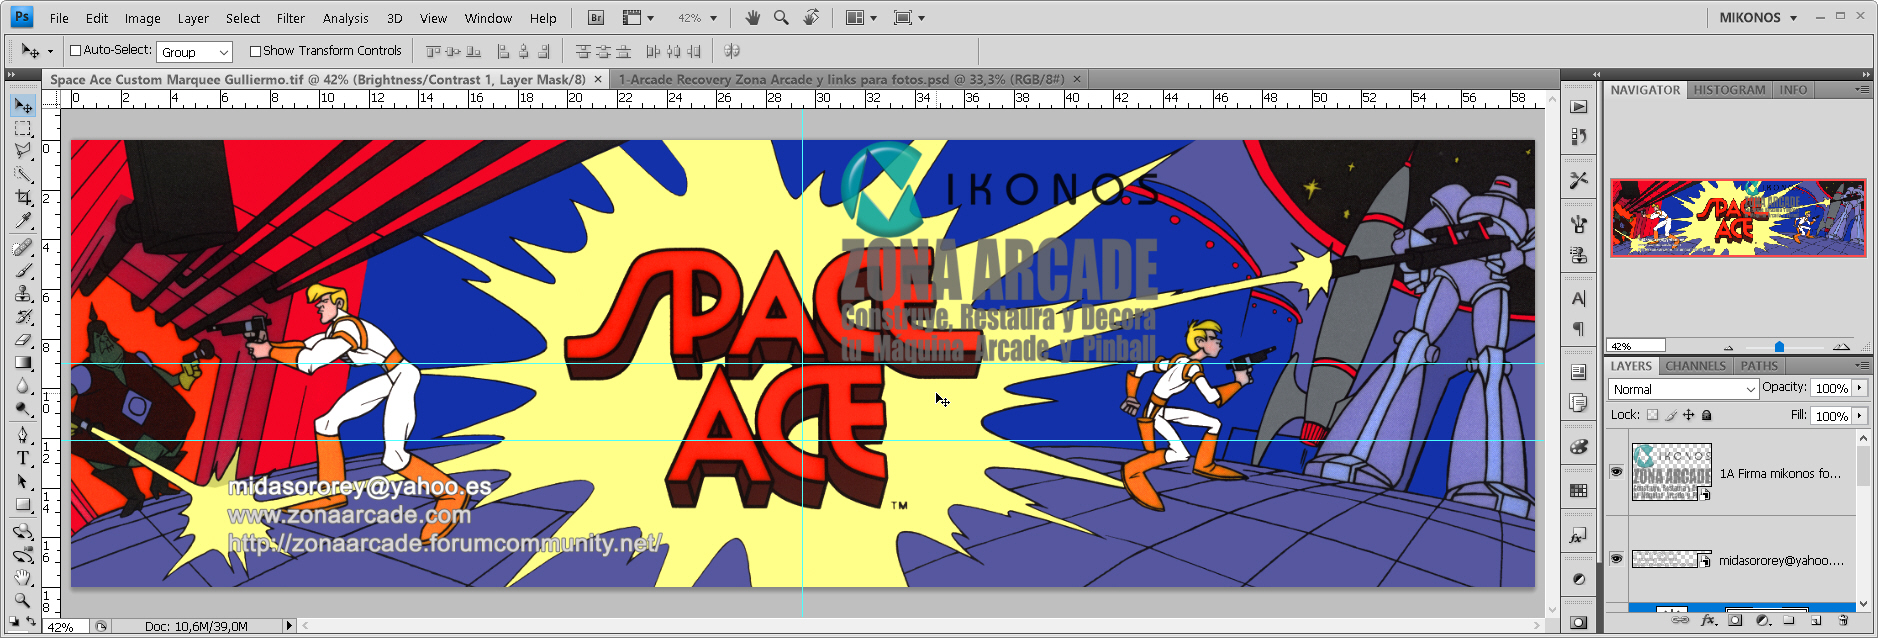 Space Ace Custom Marquee Guillermo1